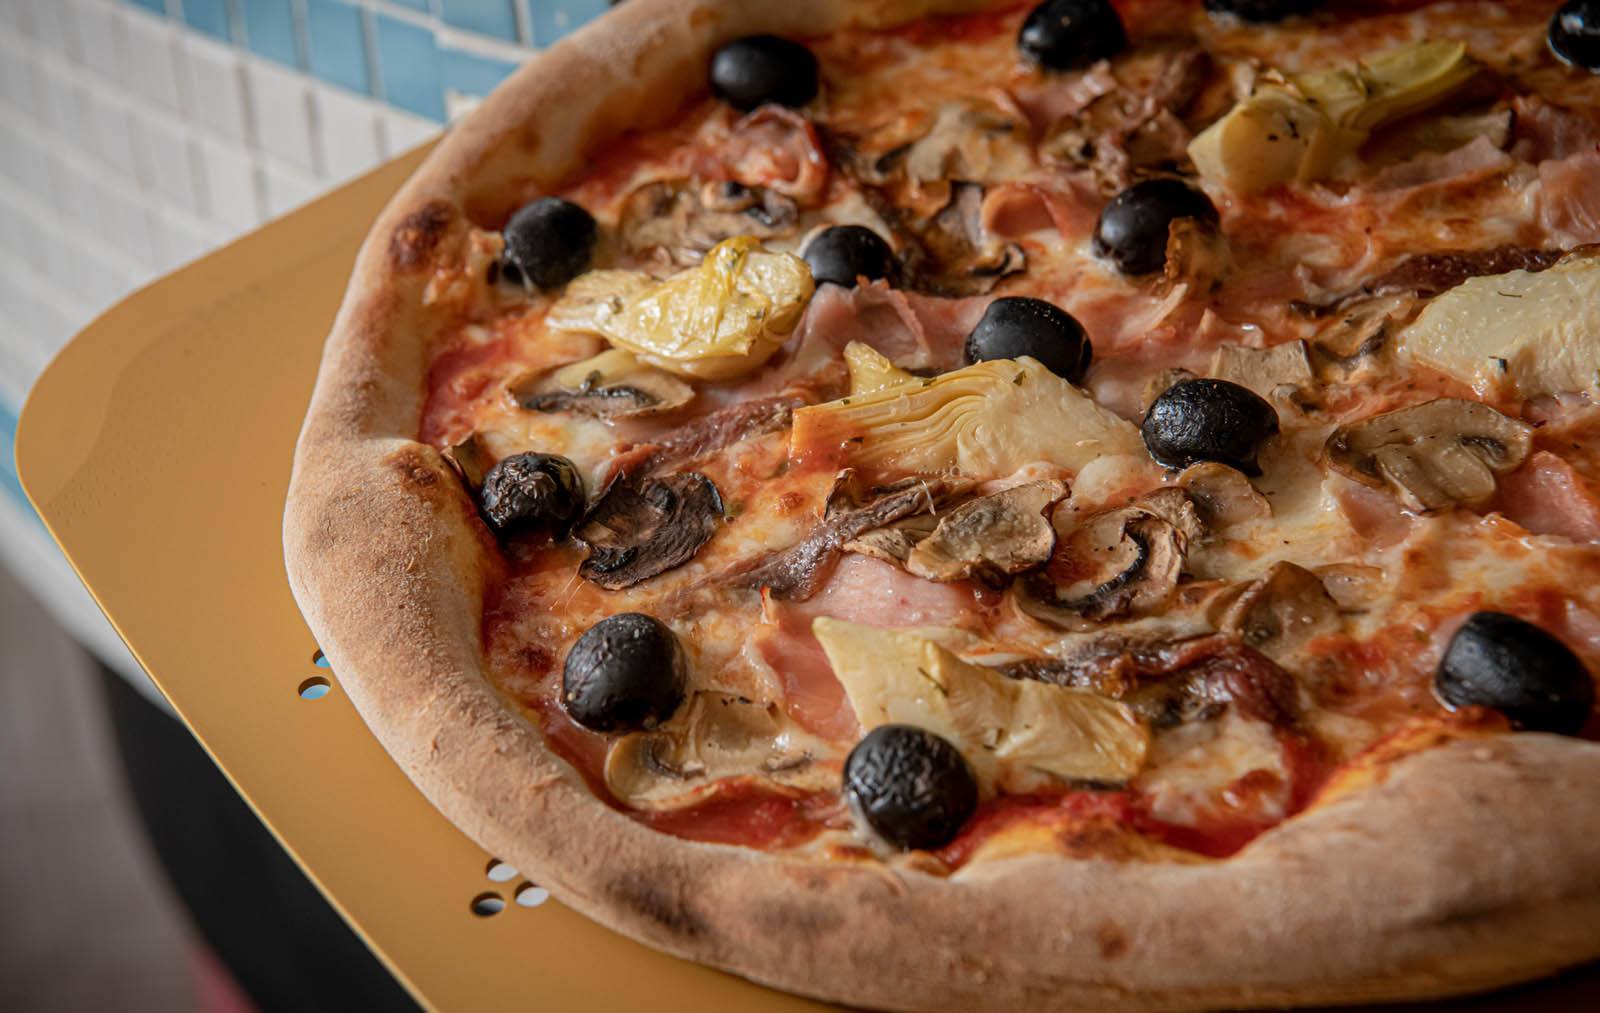 Things to do in Hong Kong in May include trying the Capricciosa pizza at Amalfitana in Soho